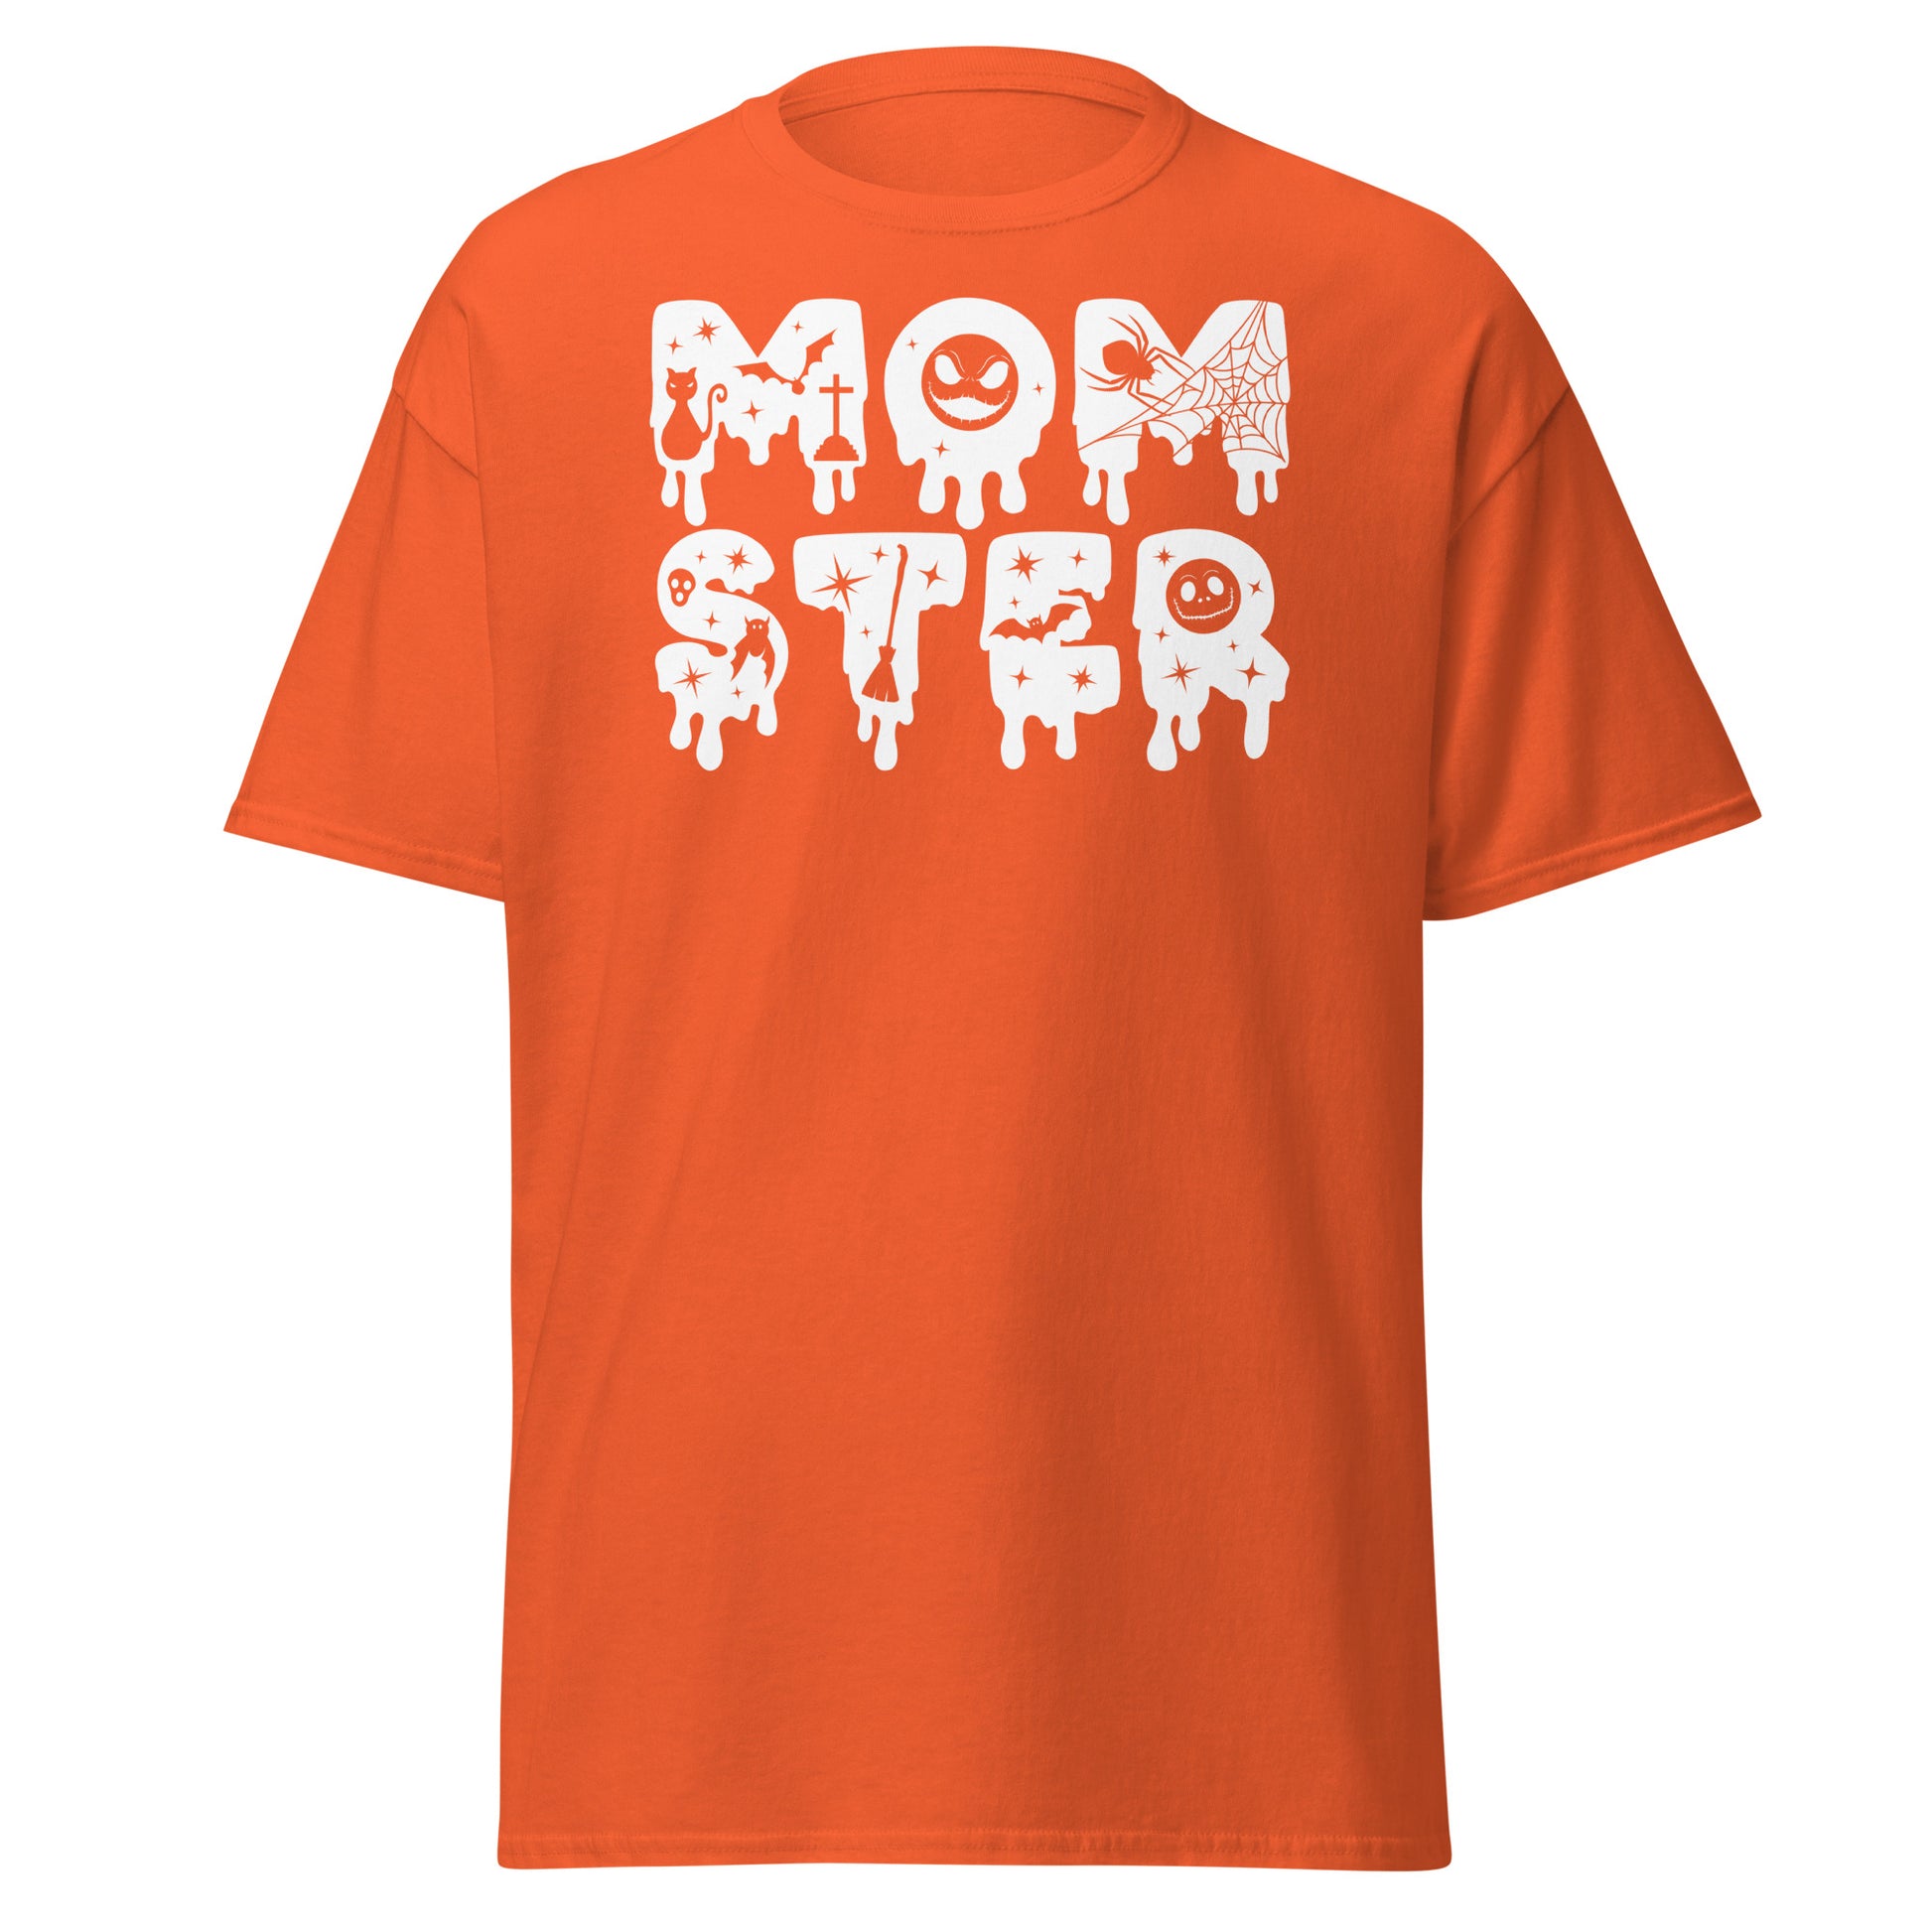 Boo-tifully Haunting: Momster Halloween T-Shirt